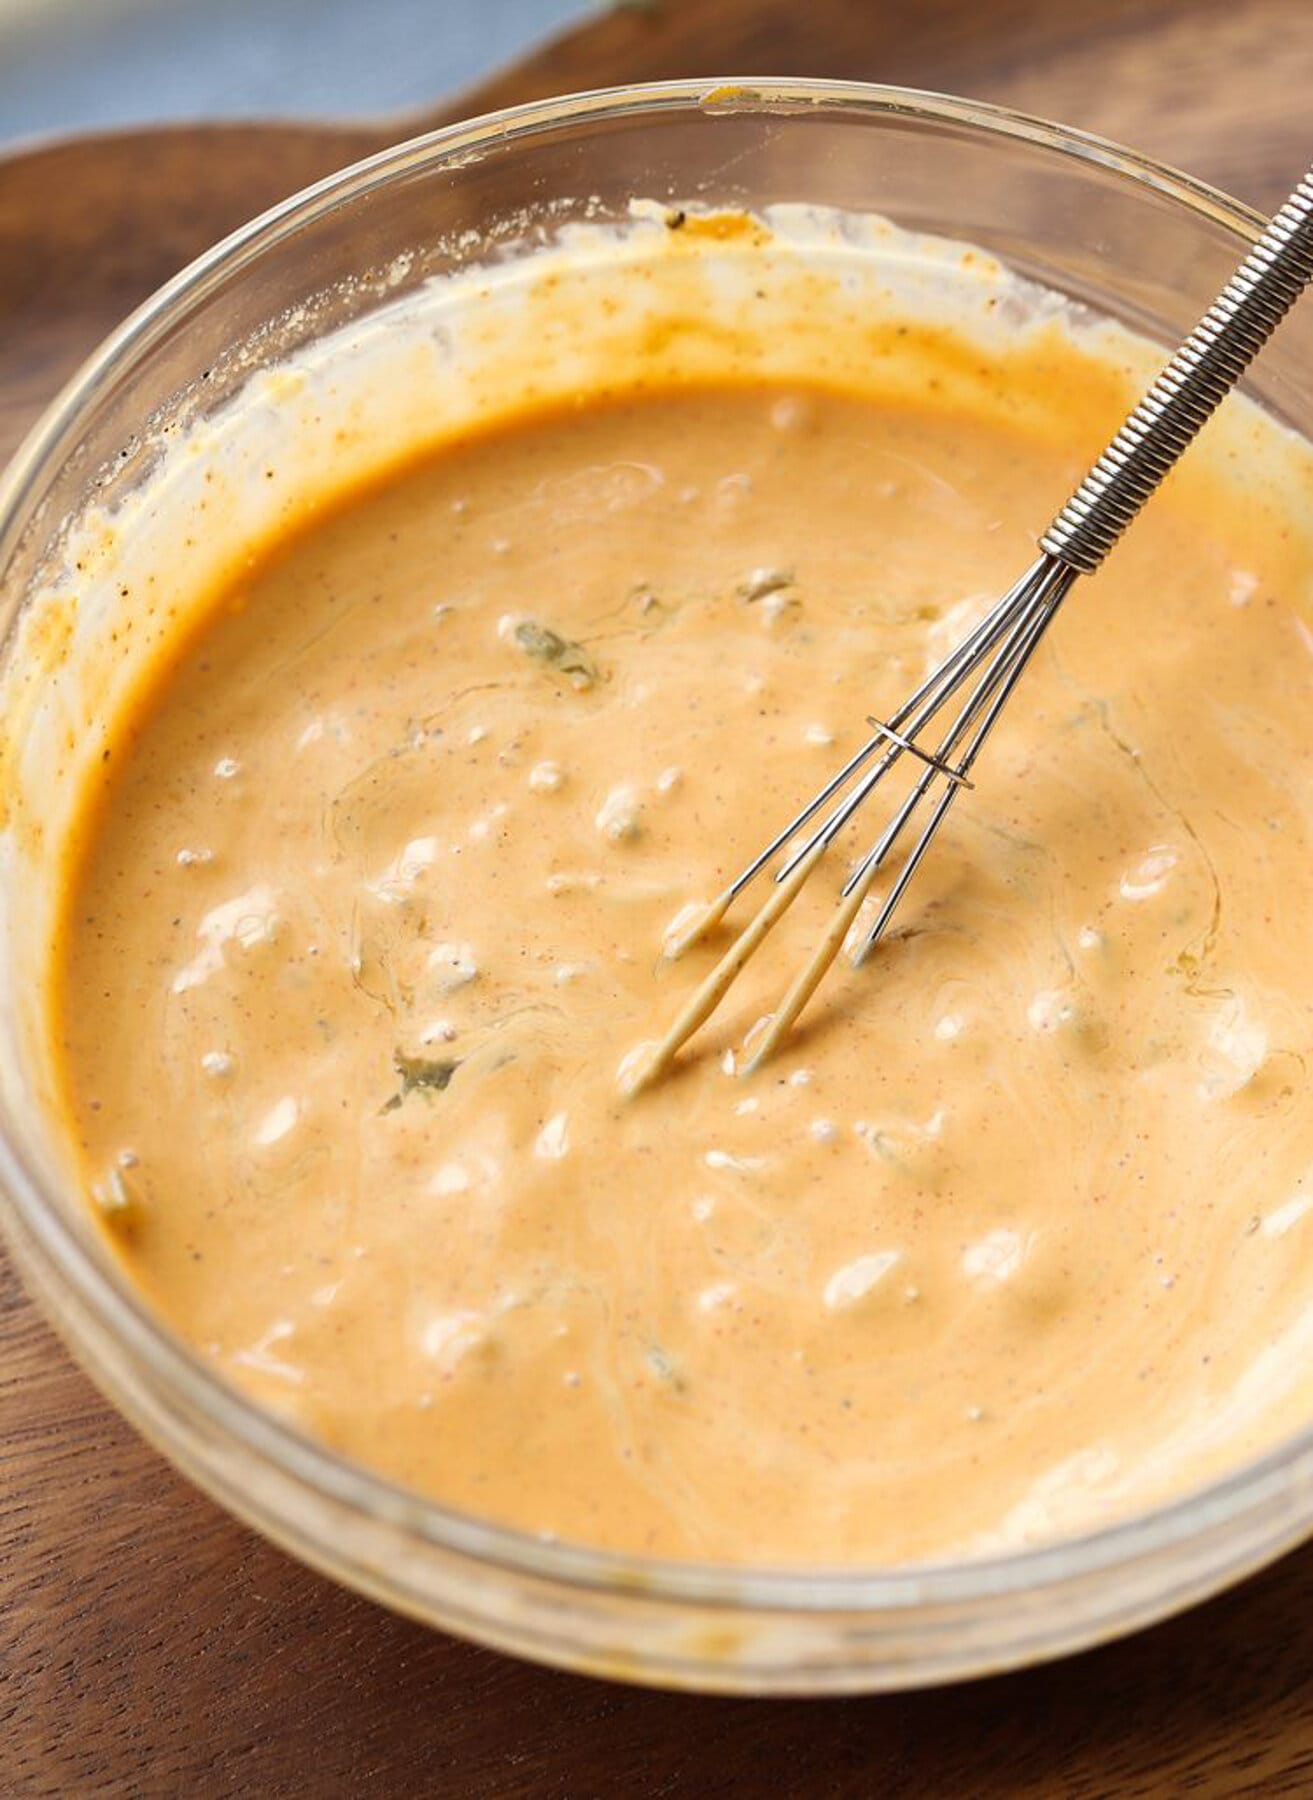 whisked chipotle dipping sauce